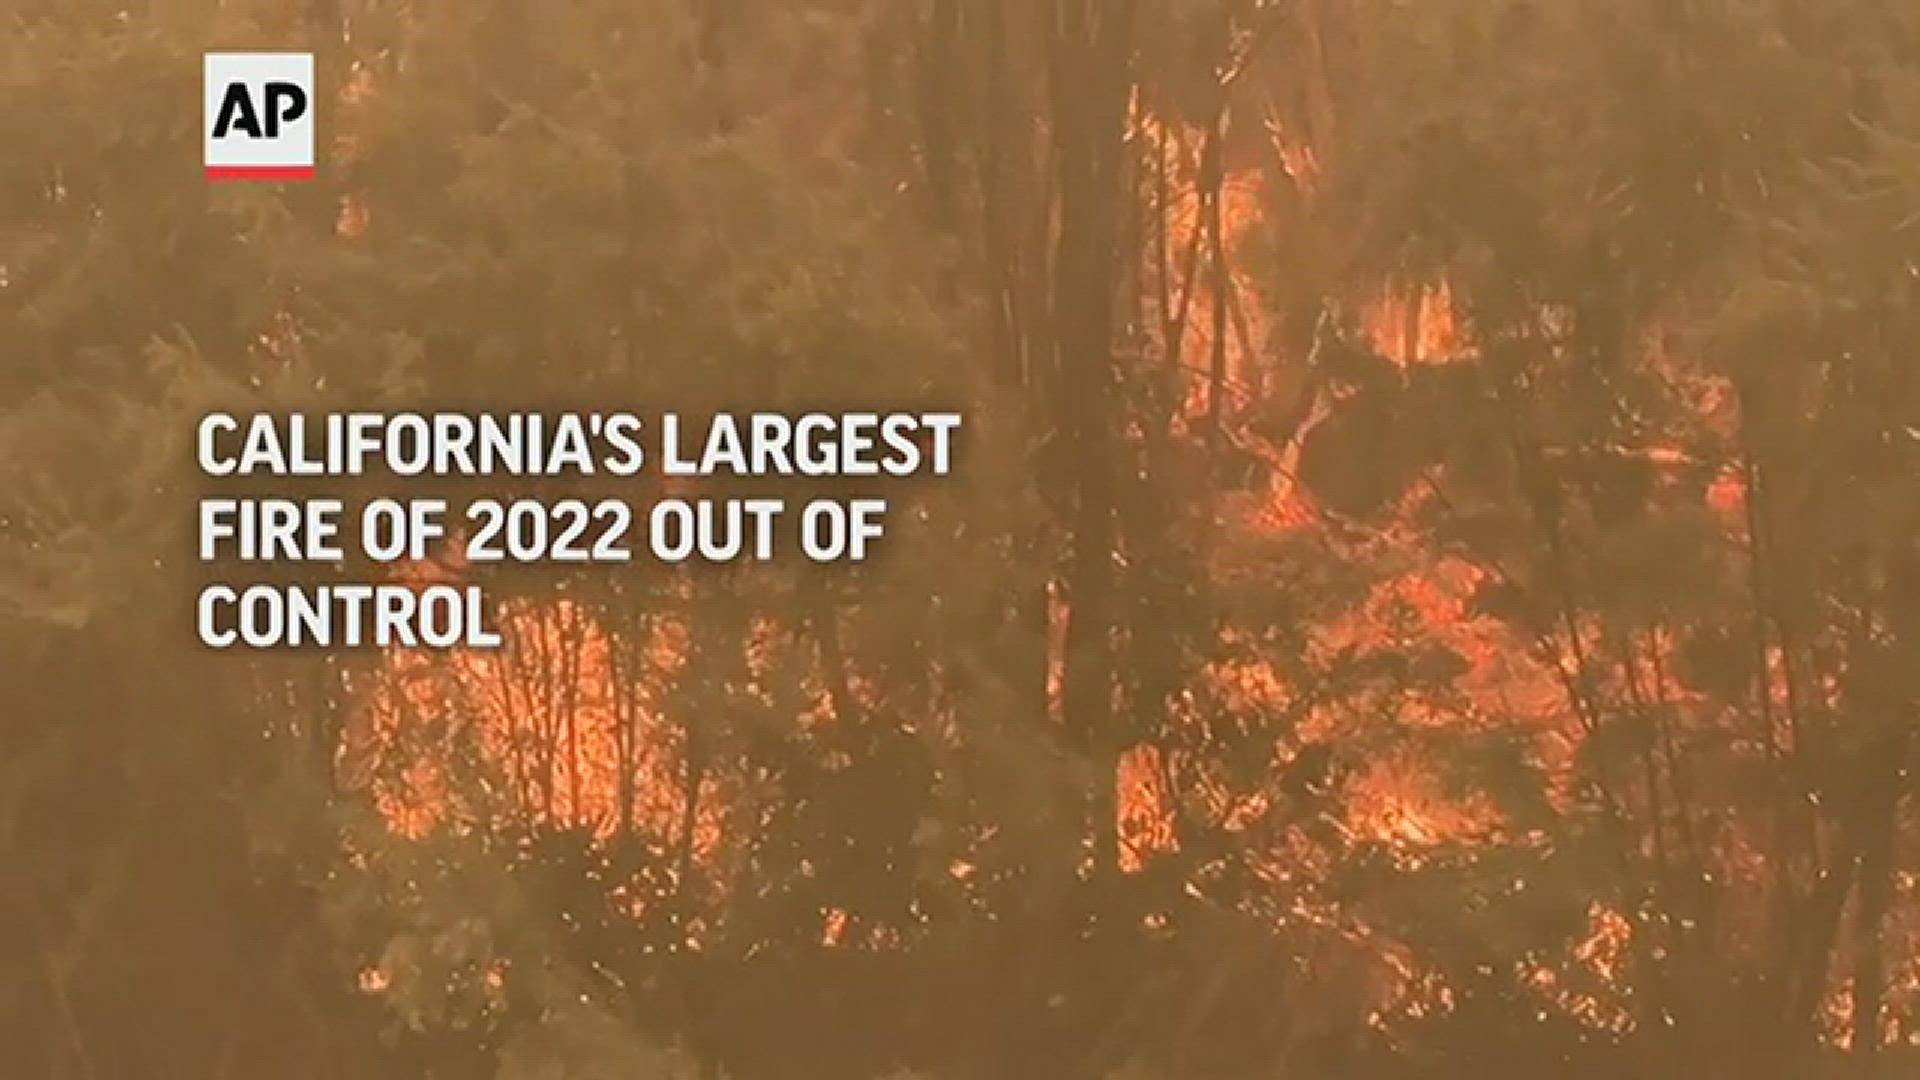 The McKinney Fire in Northern California near the state line with Oregon exploded in size to nearly 87 square miles. It is California's largest wildfire of the year.